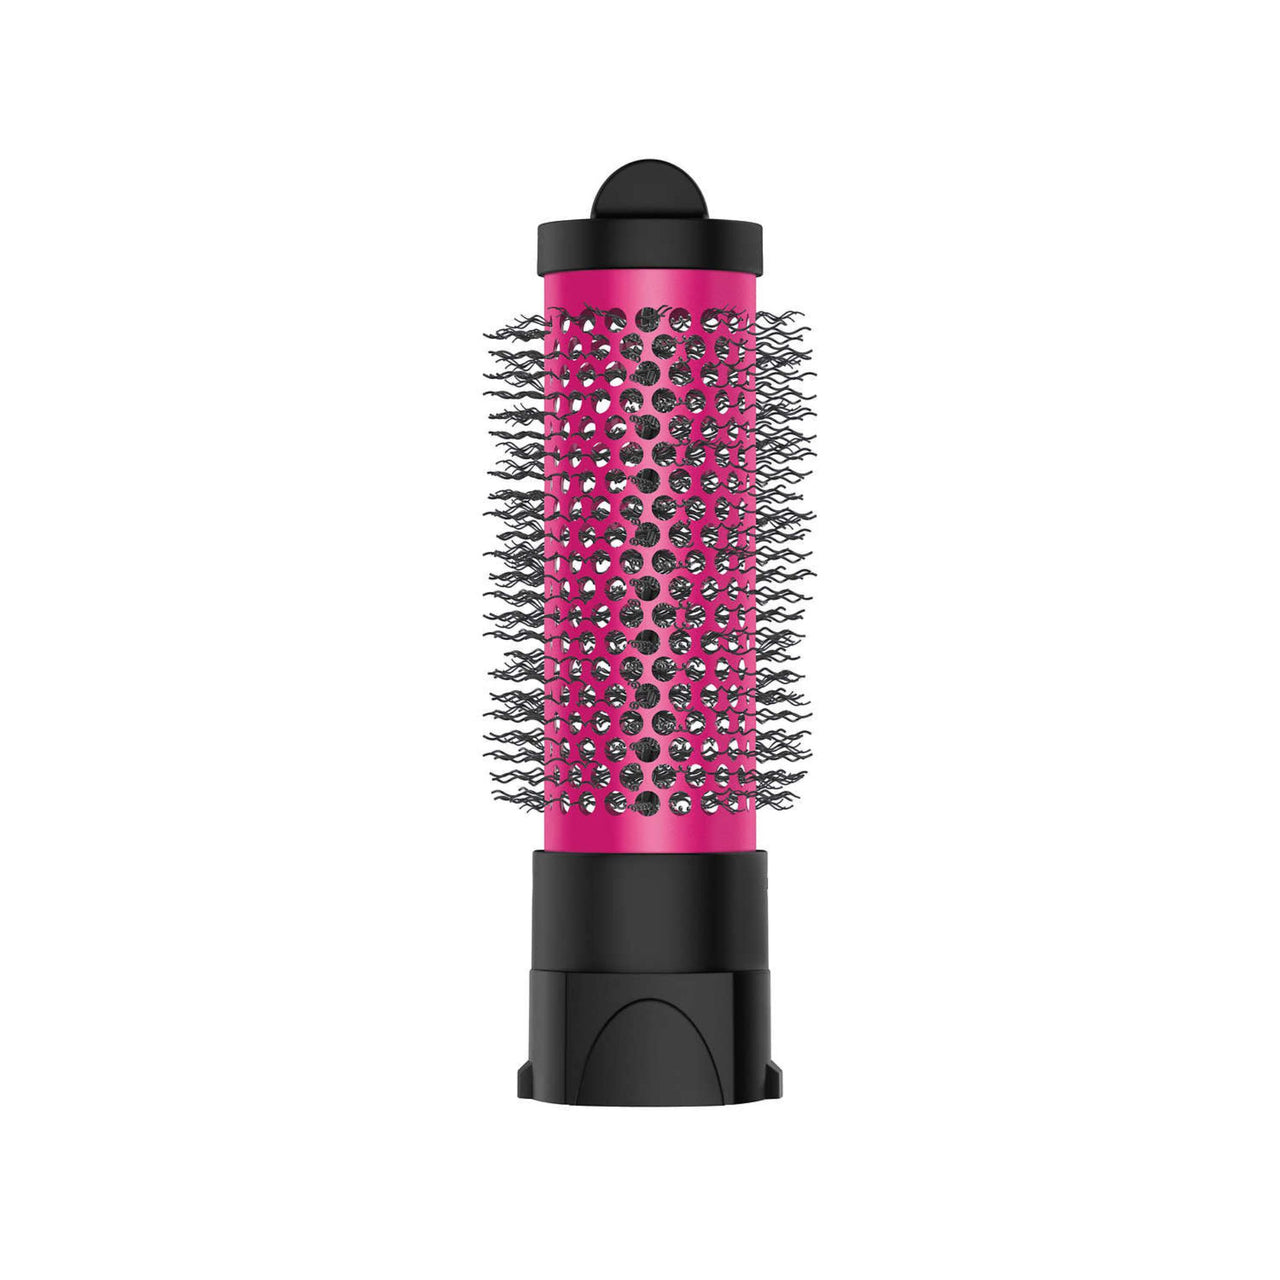 Image of Conair Knot Doctor 6-piece Detangling Hot Air Brush